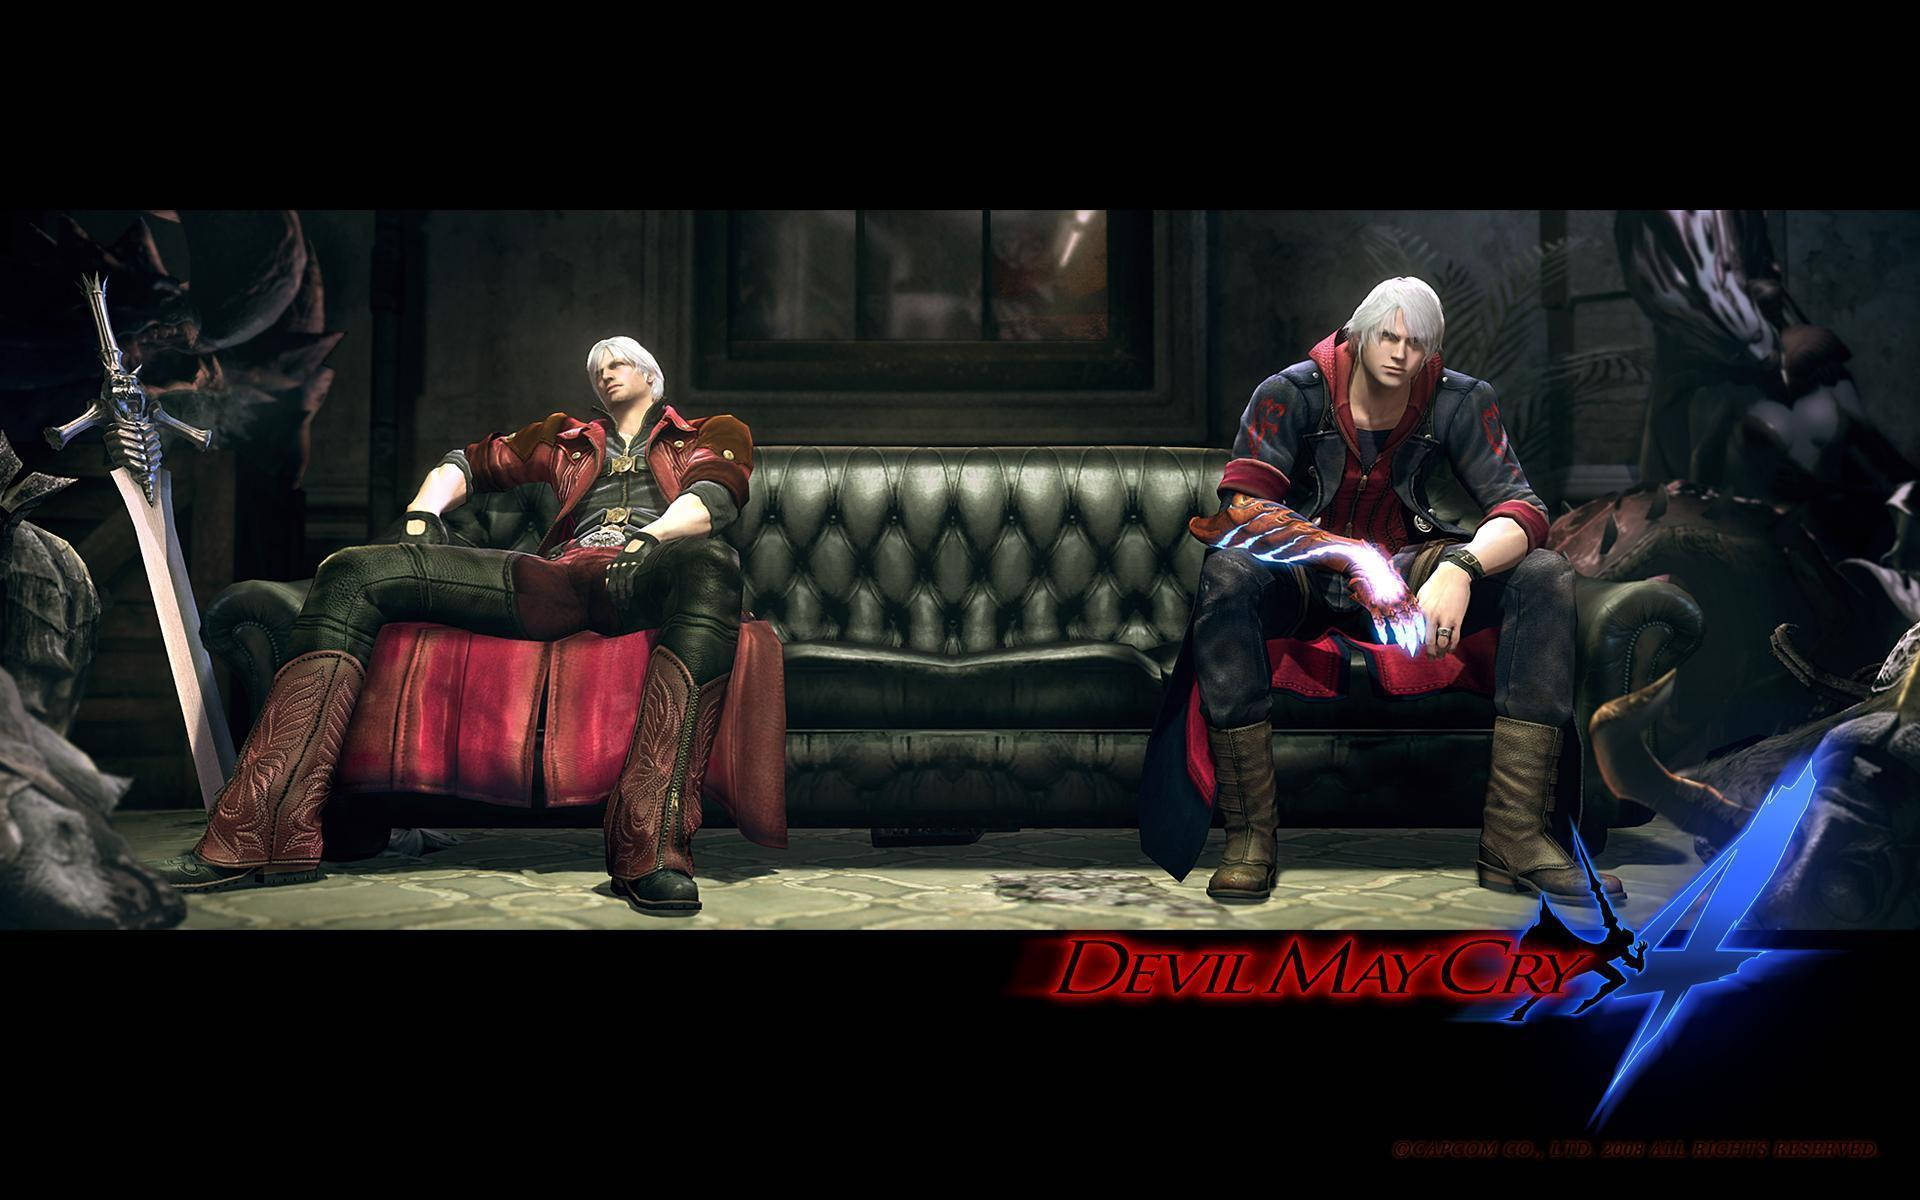 A clash between heroes - Dante and Nero from Devil May Cry Wallpaper